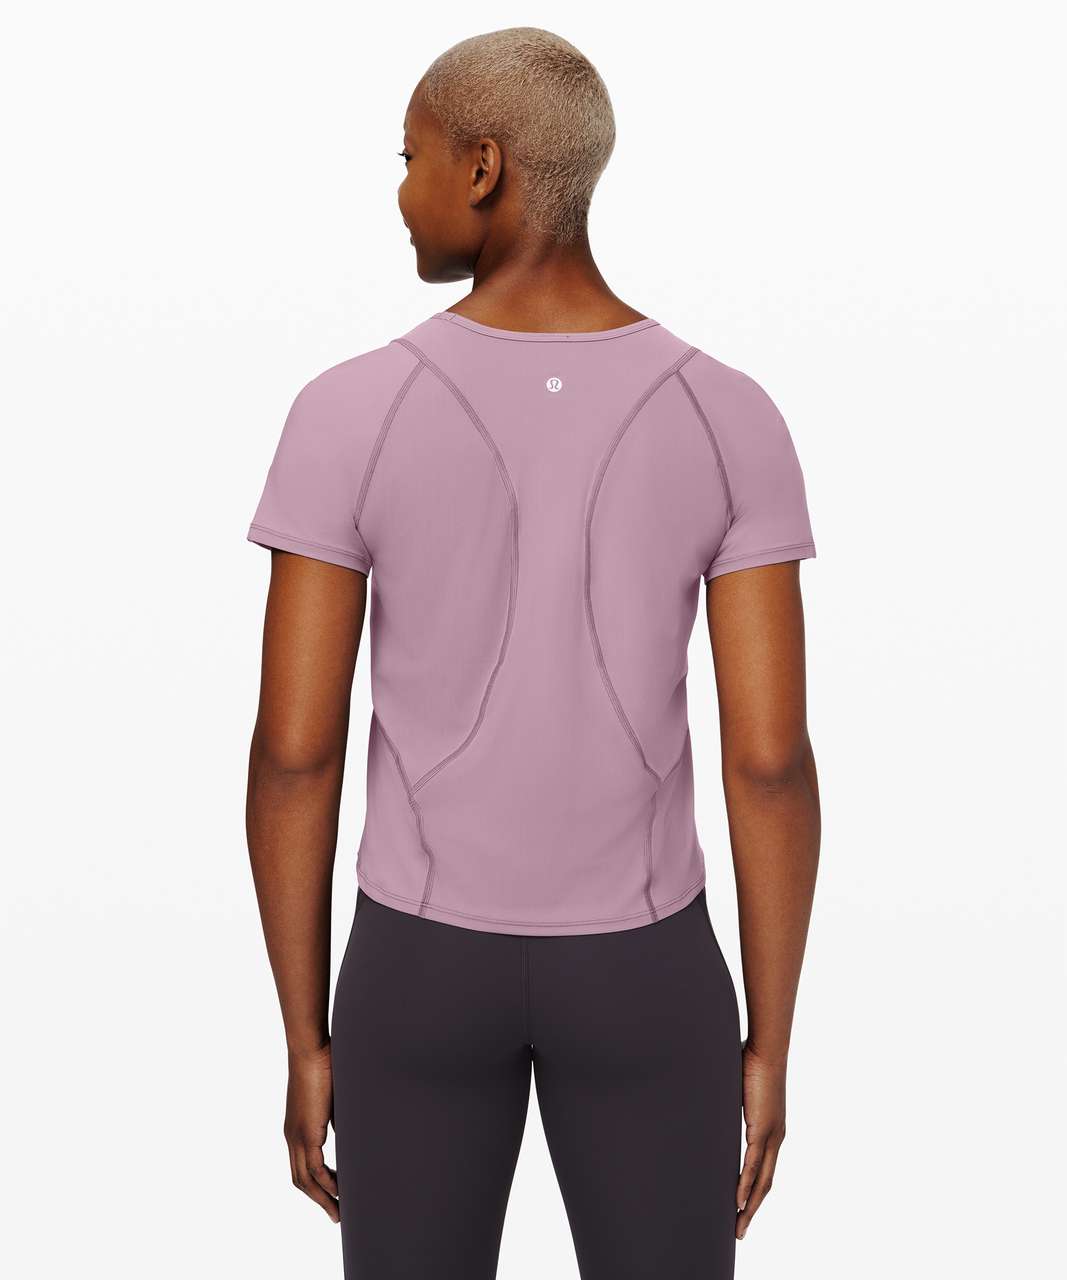 Lululemon Outrun the Heat Short Sleeve - Frosted Mulberry